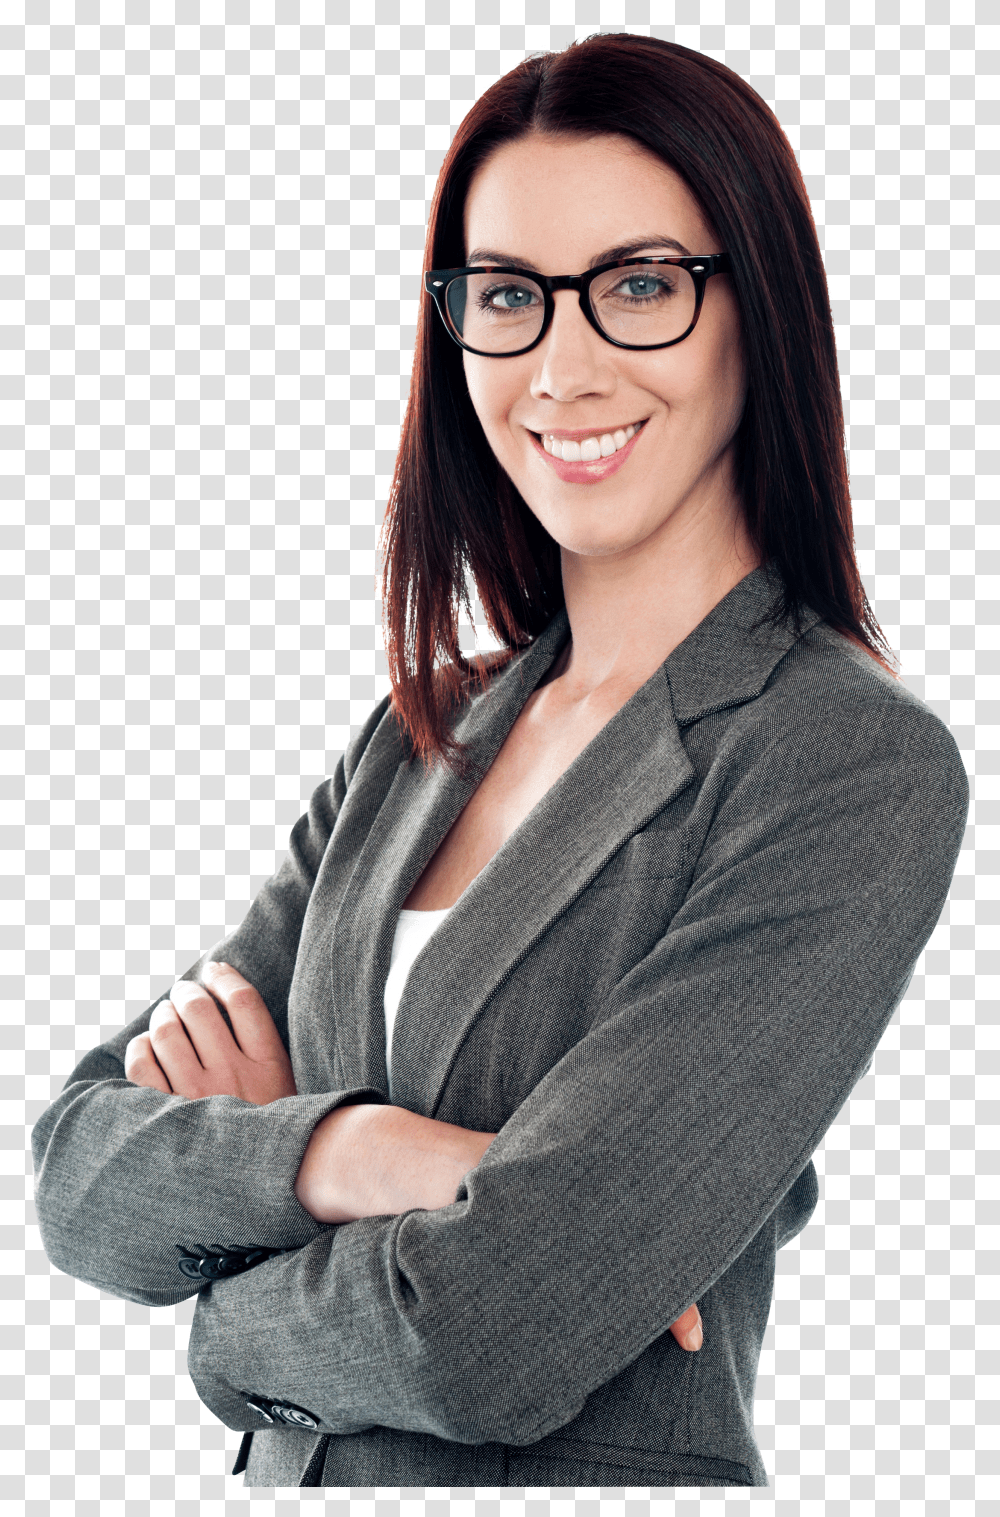 Specs Girl Image Corporate Pose Transparent Png